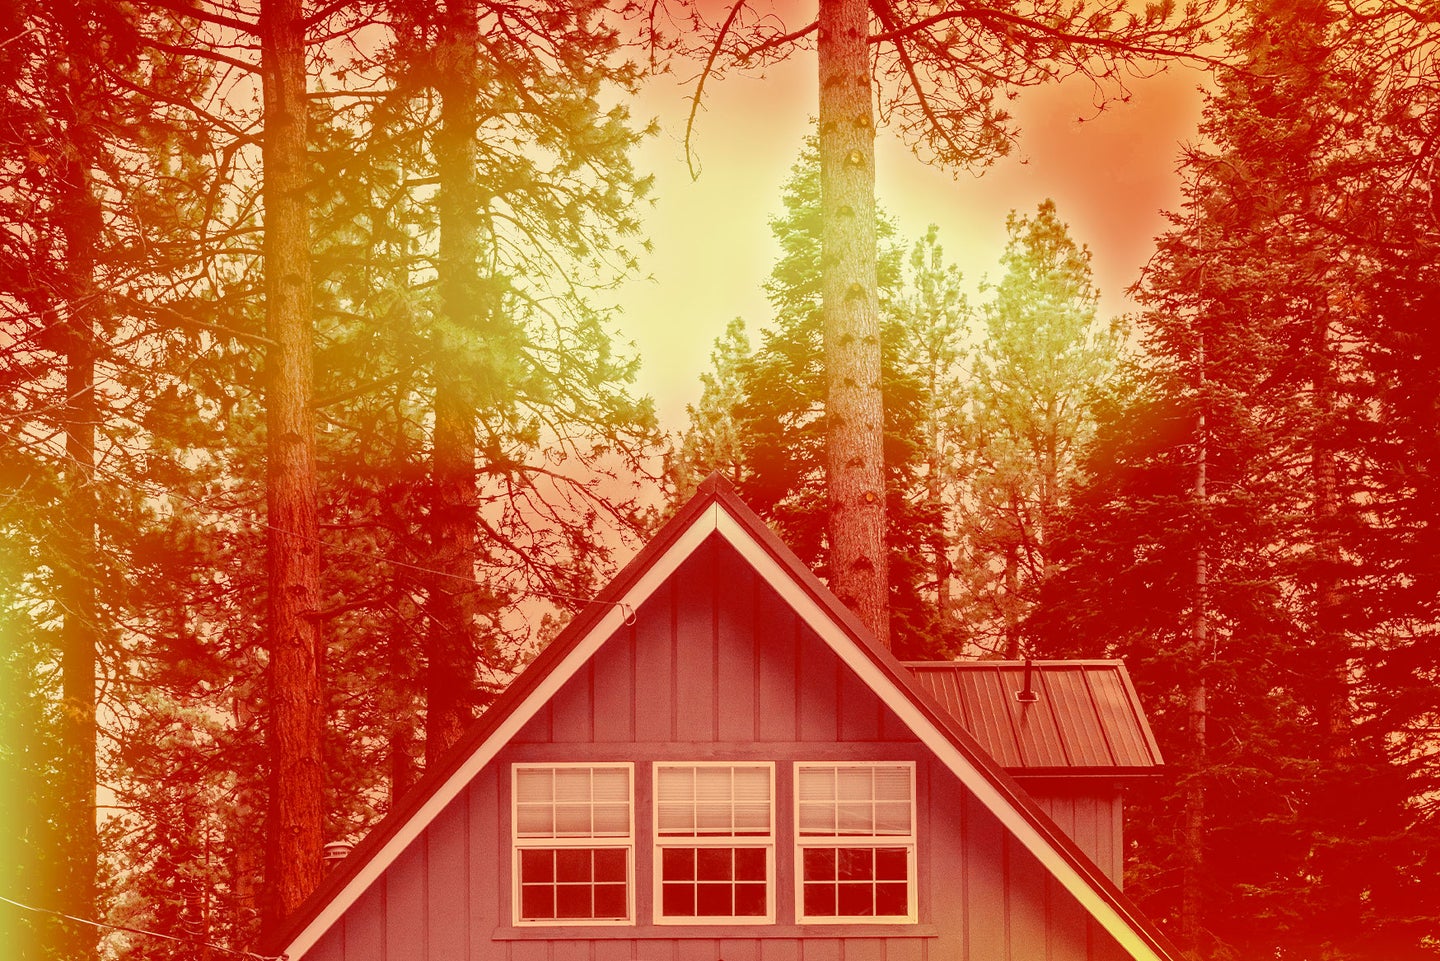 Roof of a house surrounded by trees with a red and orange color overlay.